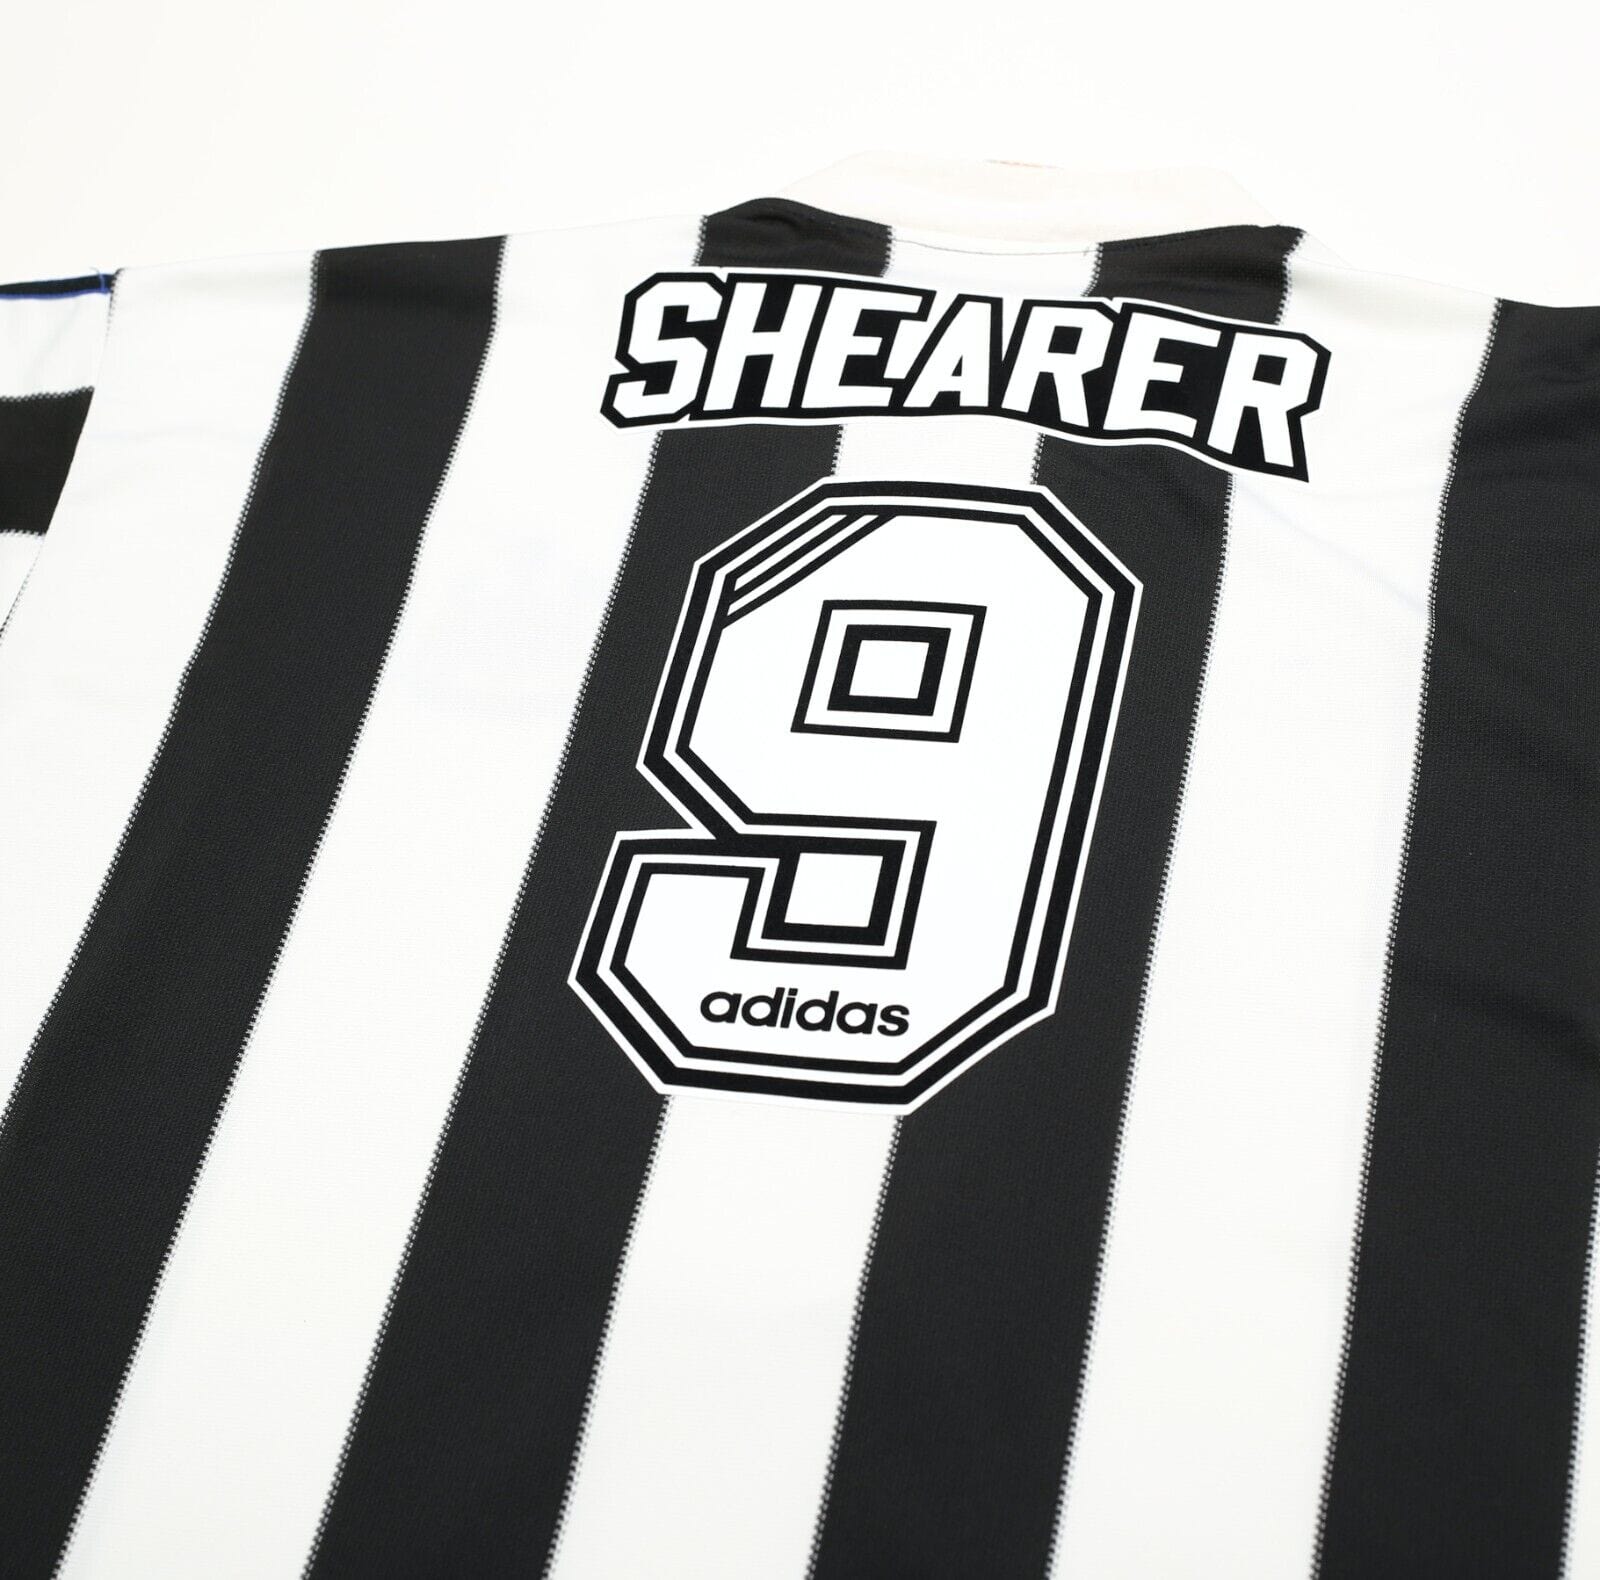 SOLD! 1996-97 Newcastle Away Shirt Shearer #9 Made by: Adidas Size